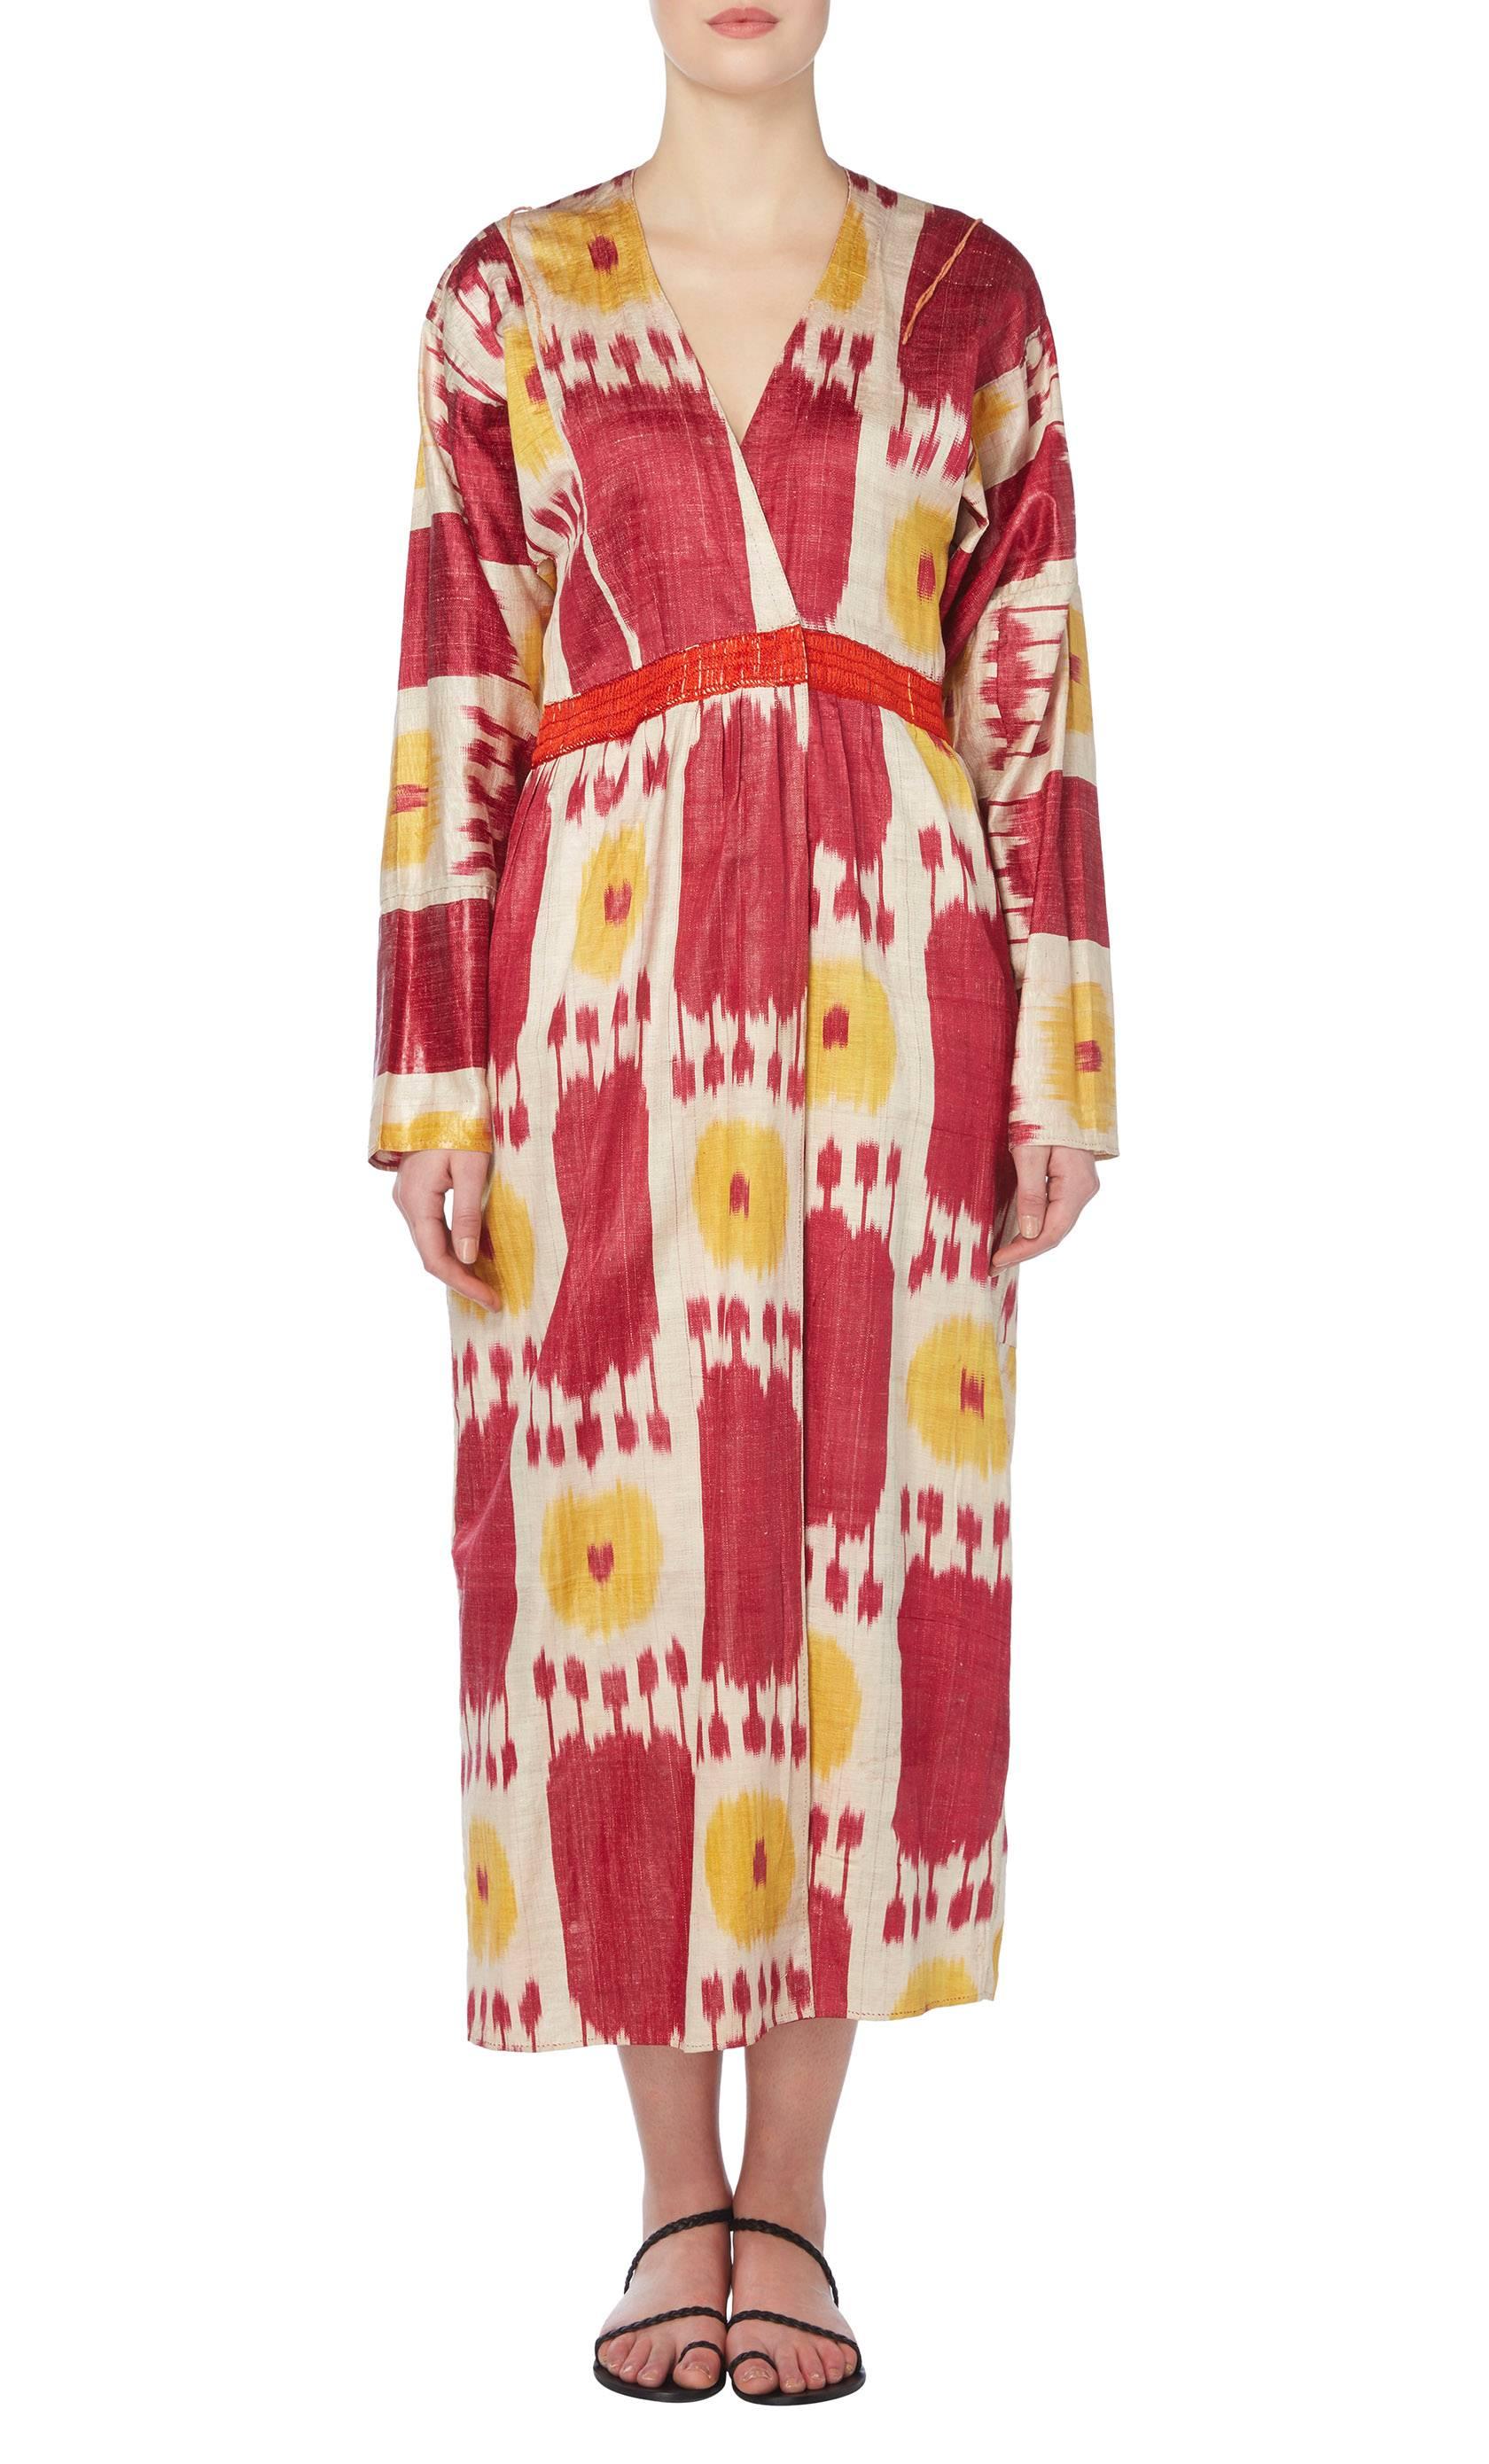 Constructed in deep red and yellow ikat print silk
Featuring hand-finished stitching
No fastenings
Professionally dry cleaned and ozone-treated
Inspected by a couture-trained seamstress
All vintage items have been previously worn, gentle signs